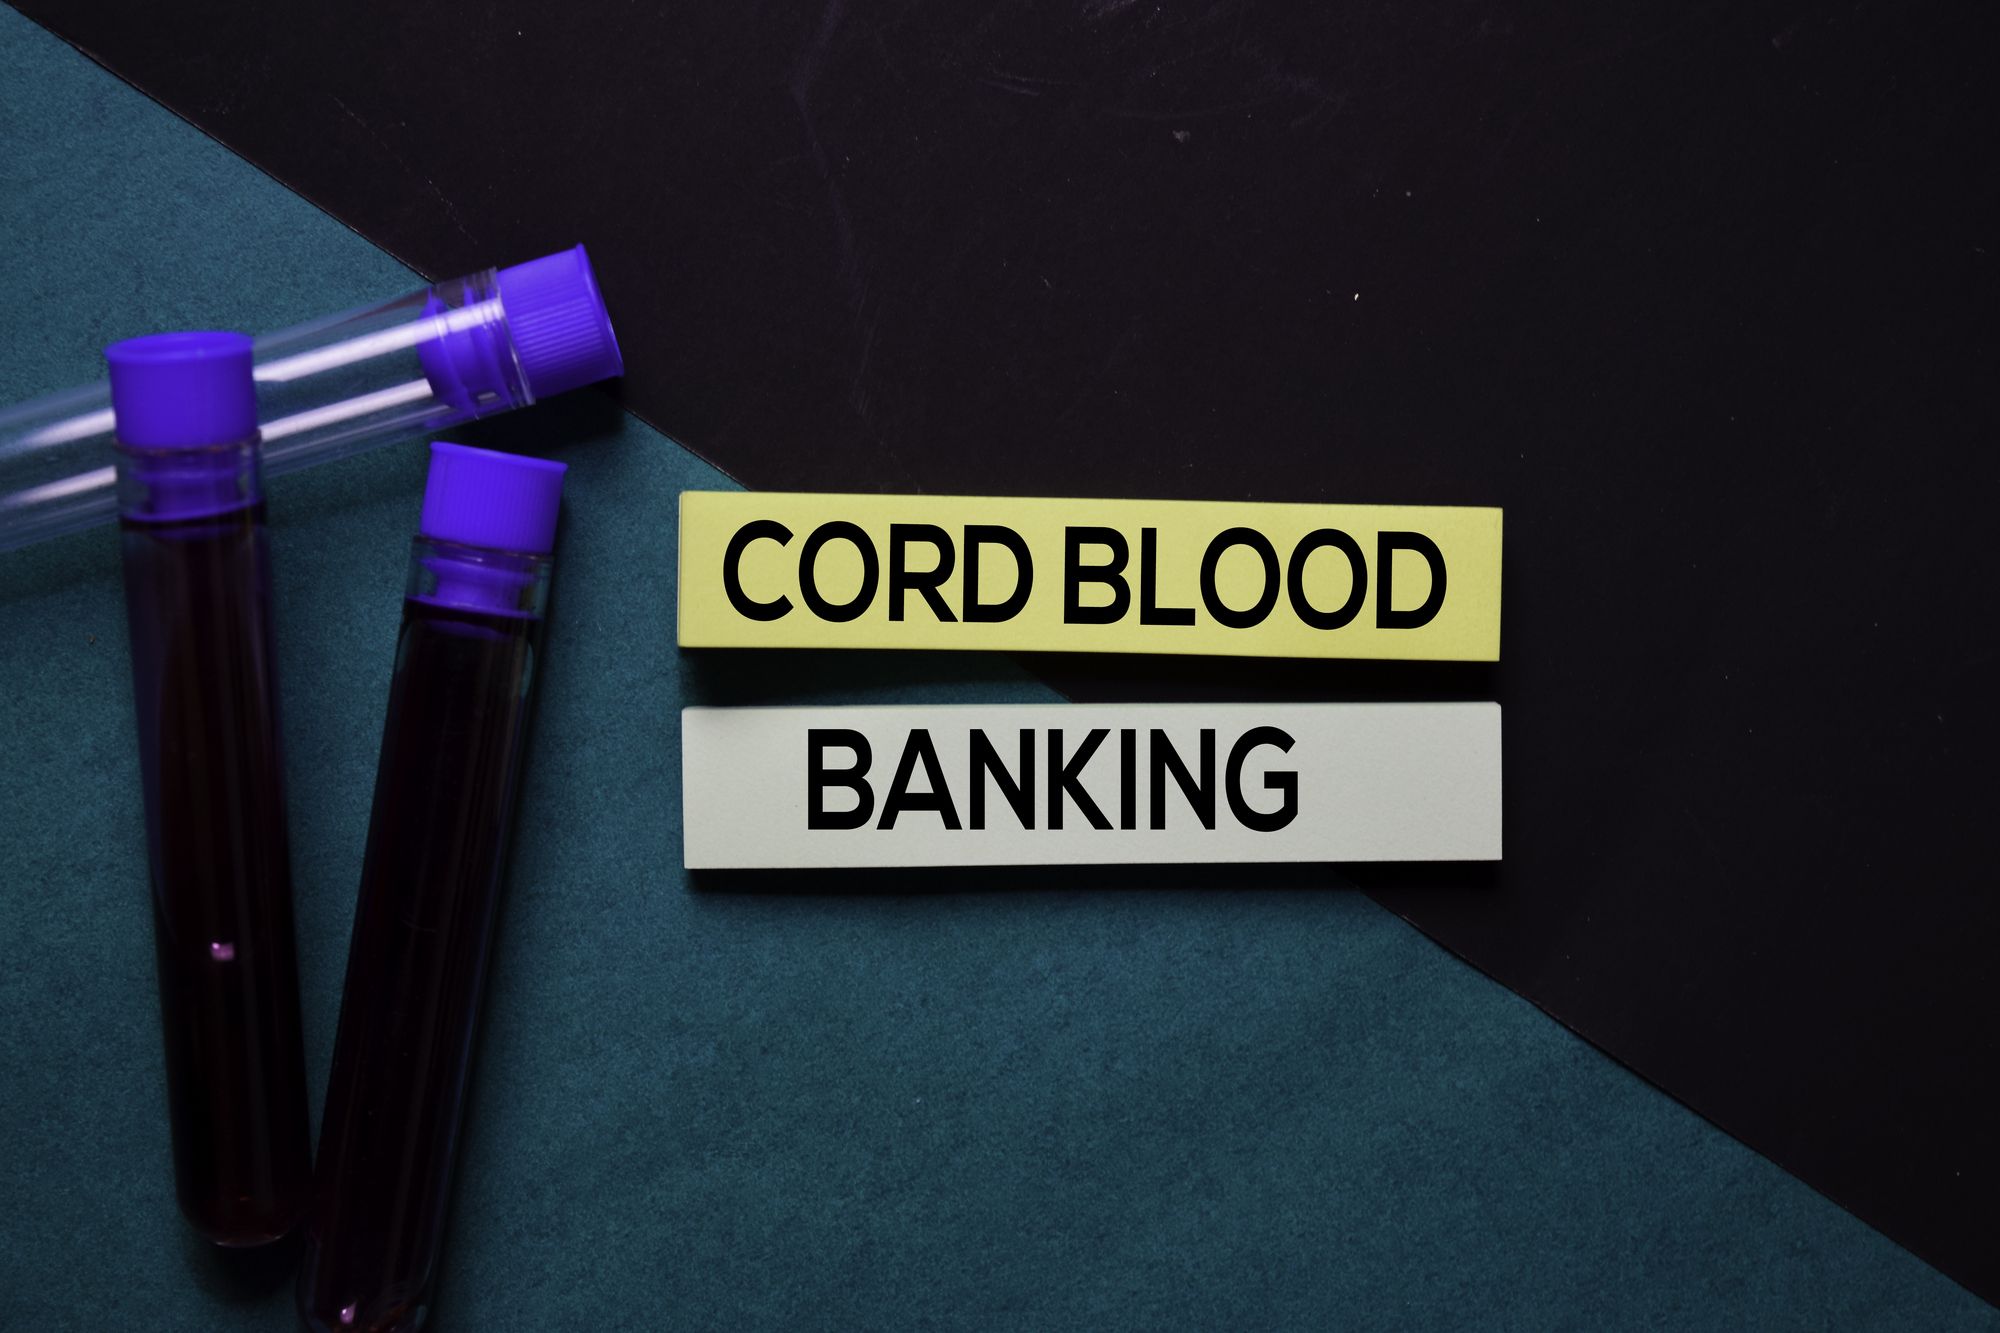 Cord blood bank labels regarding parents demanding answers as a Cord Blood Bank dodges their calls while they simultaneously face $600K lawsuit